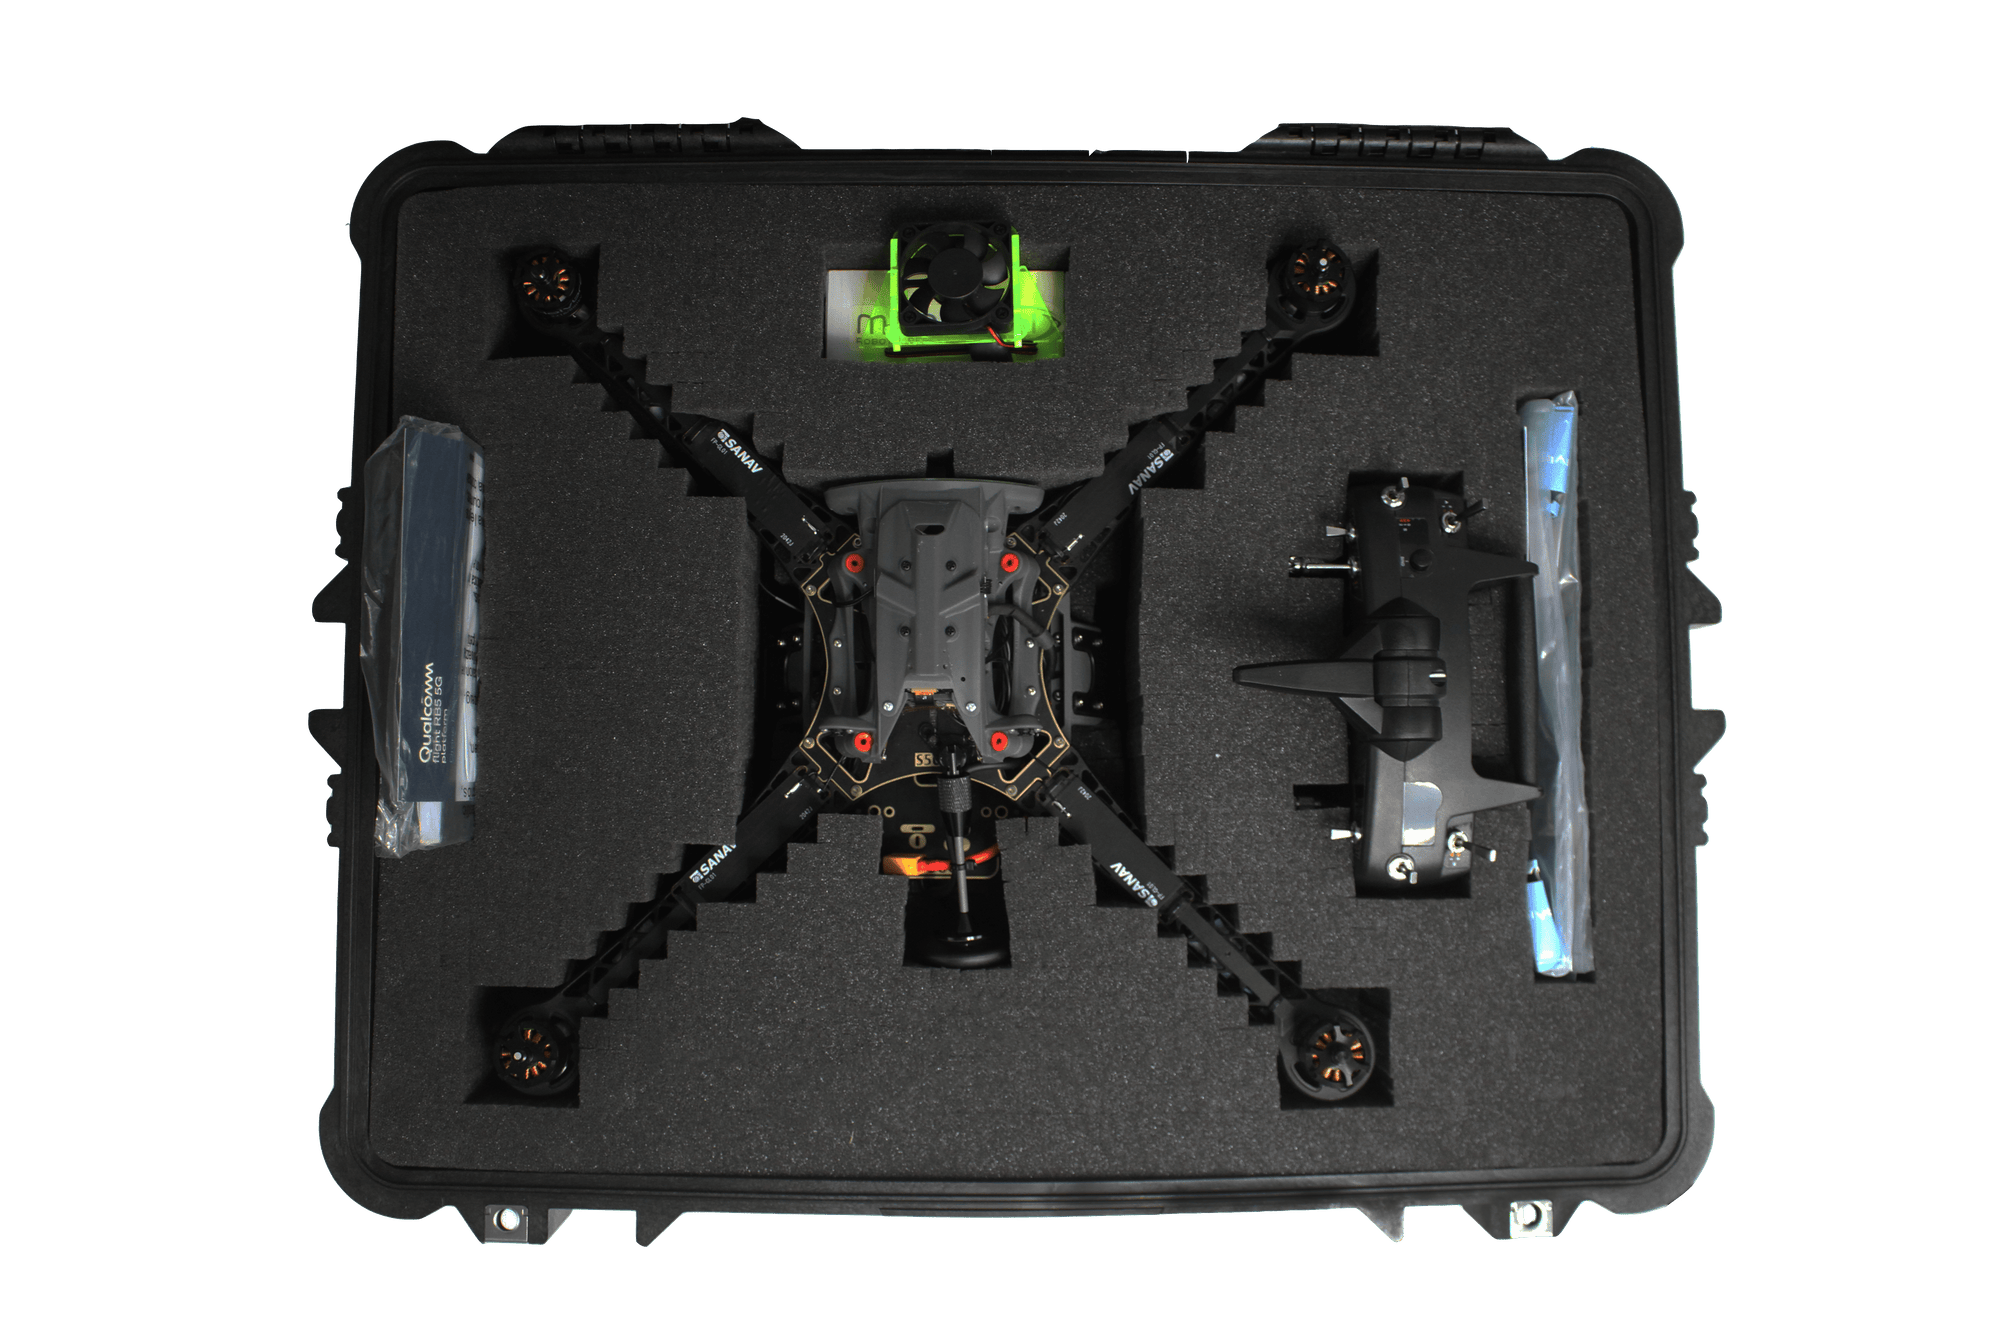 ModalAI Accessory Qualcomm Flight RB5 5G Development Drone Waterproof and Shock Resistant Drone Case with Wheels